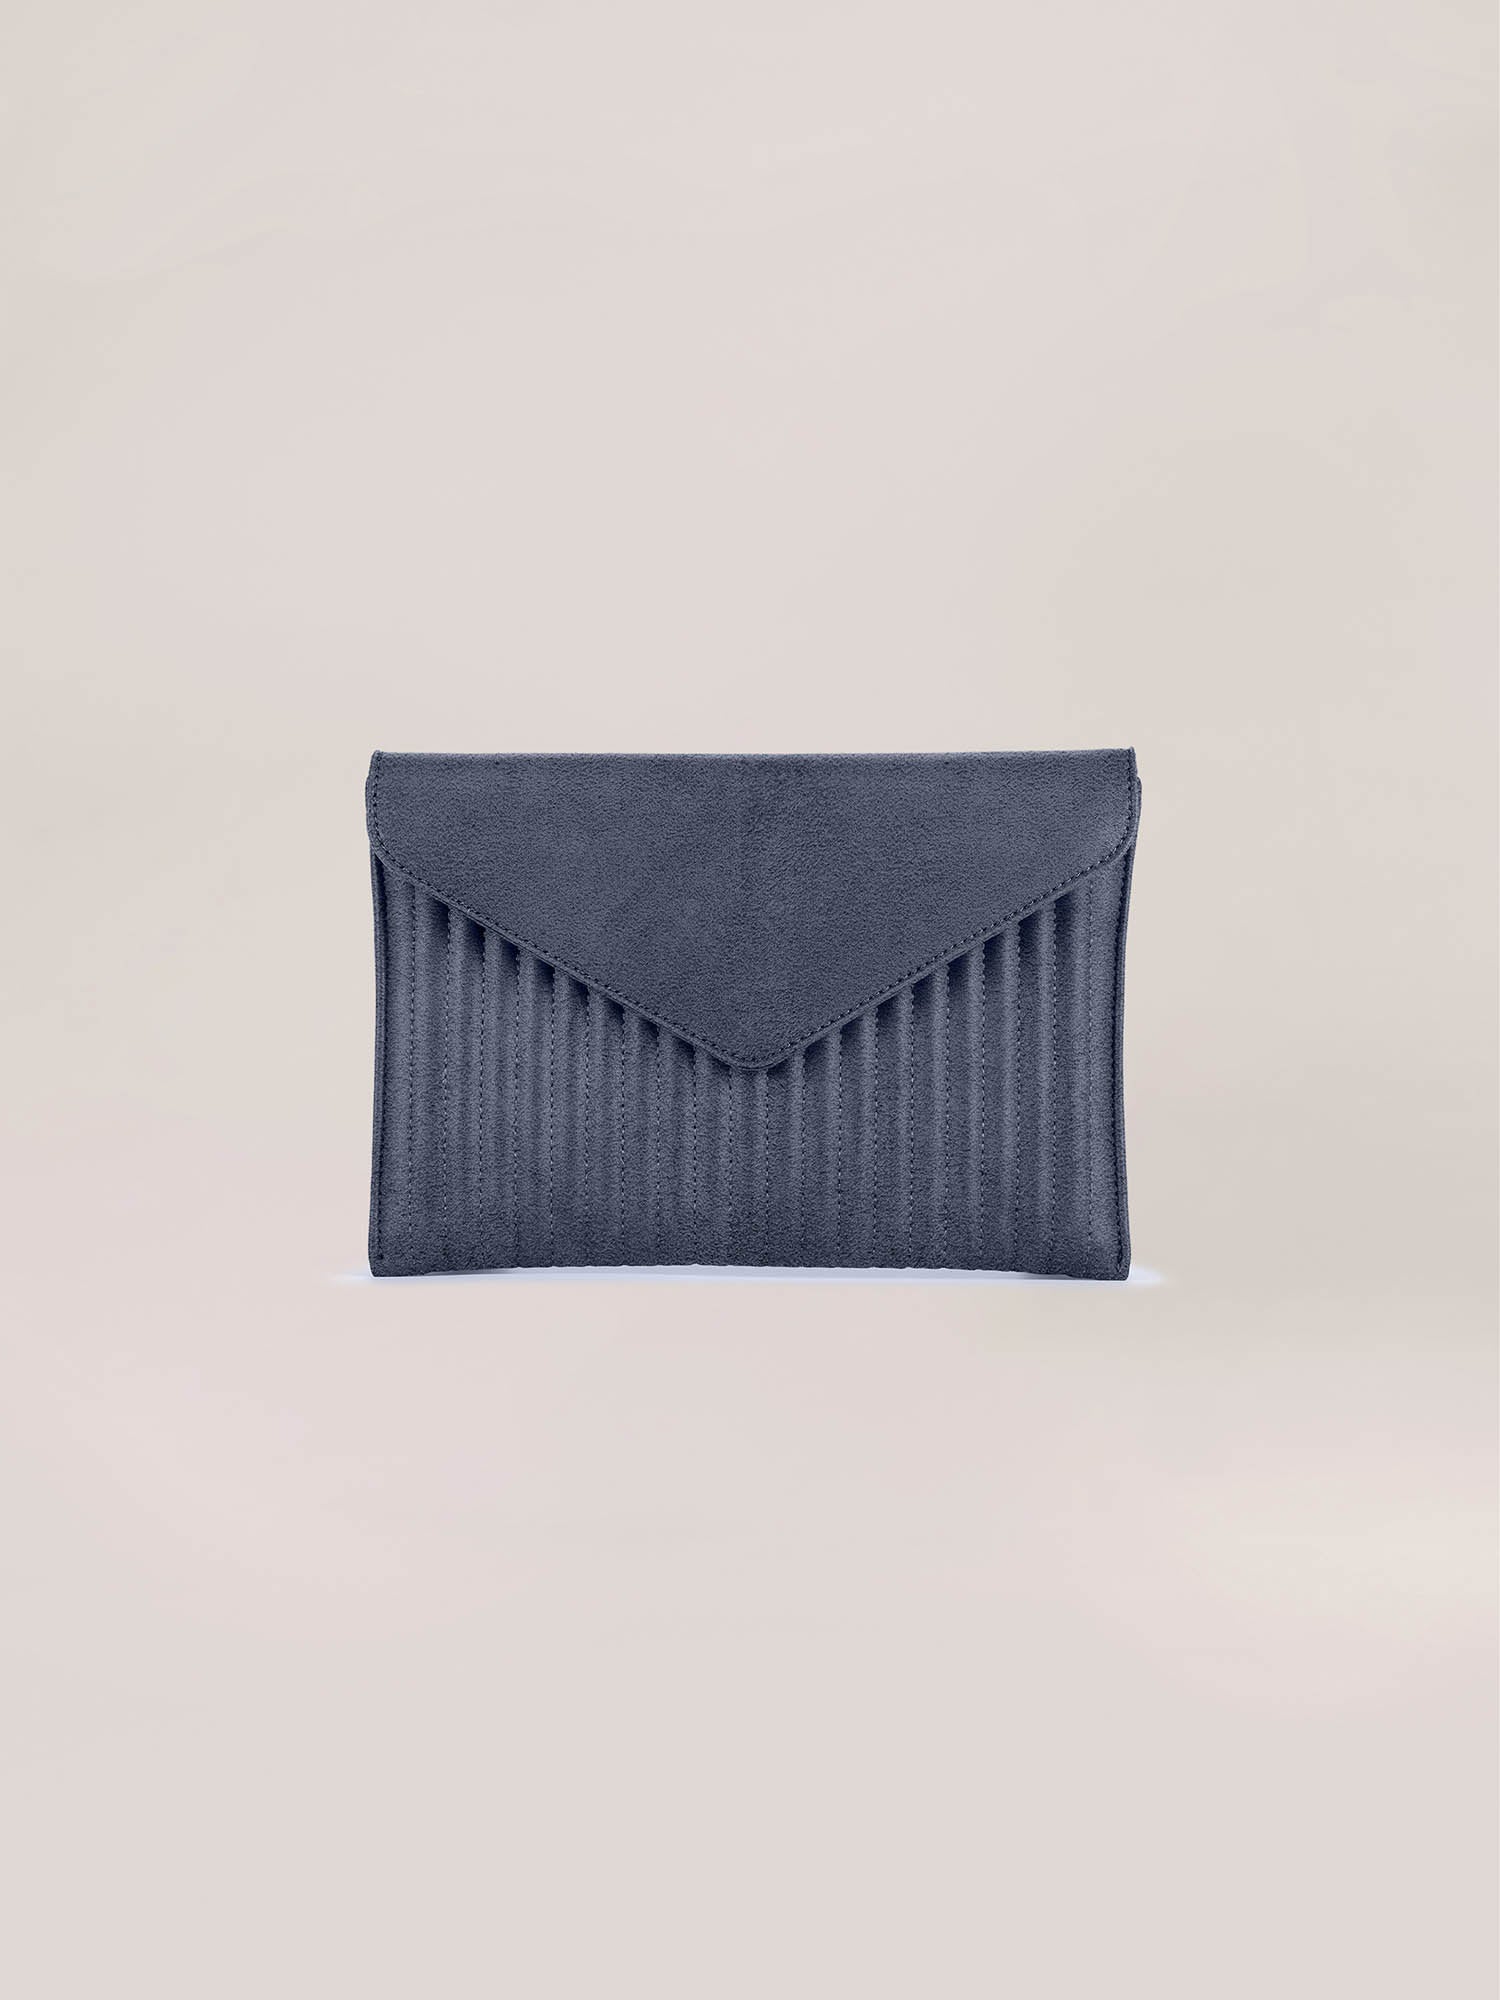 Navy Blue 24-7 Tote Bag After Hours Clutch Front View